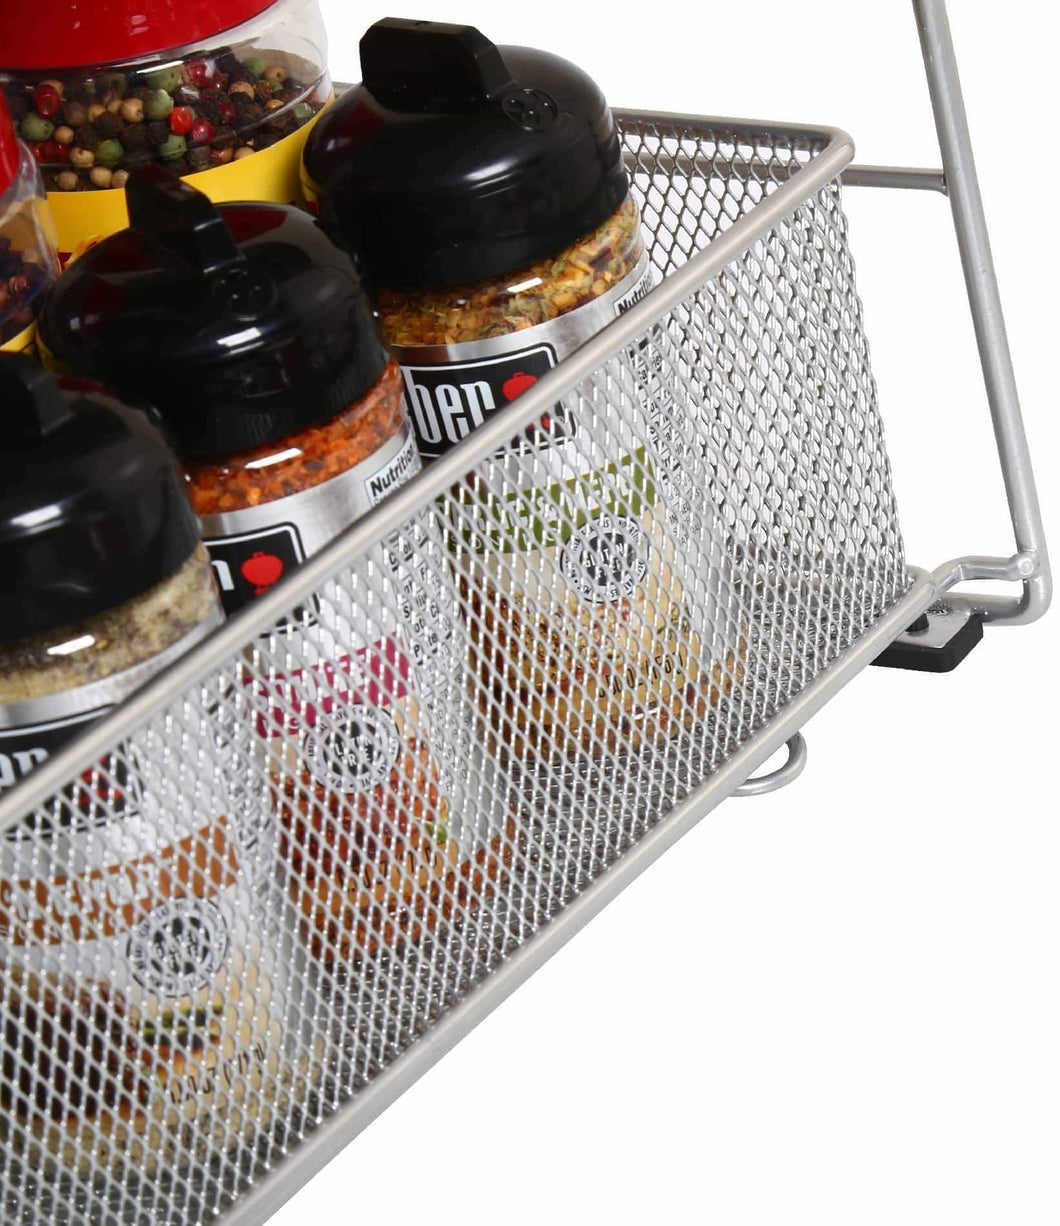 YBM Home Silver 2 Tier Mesh Sliding Spice and Sauces Basket Cabinet Organizer Drawer 2304 - Productive Organizing